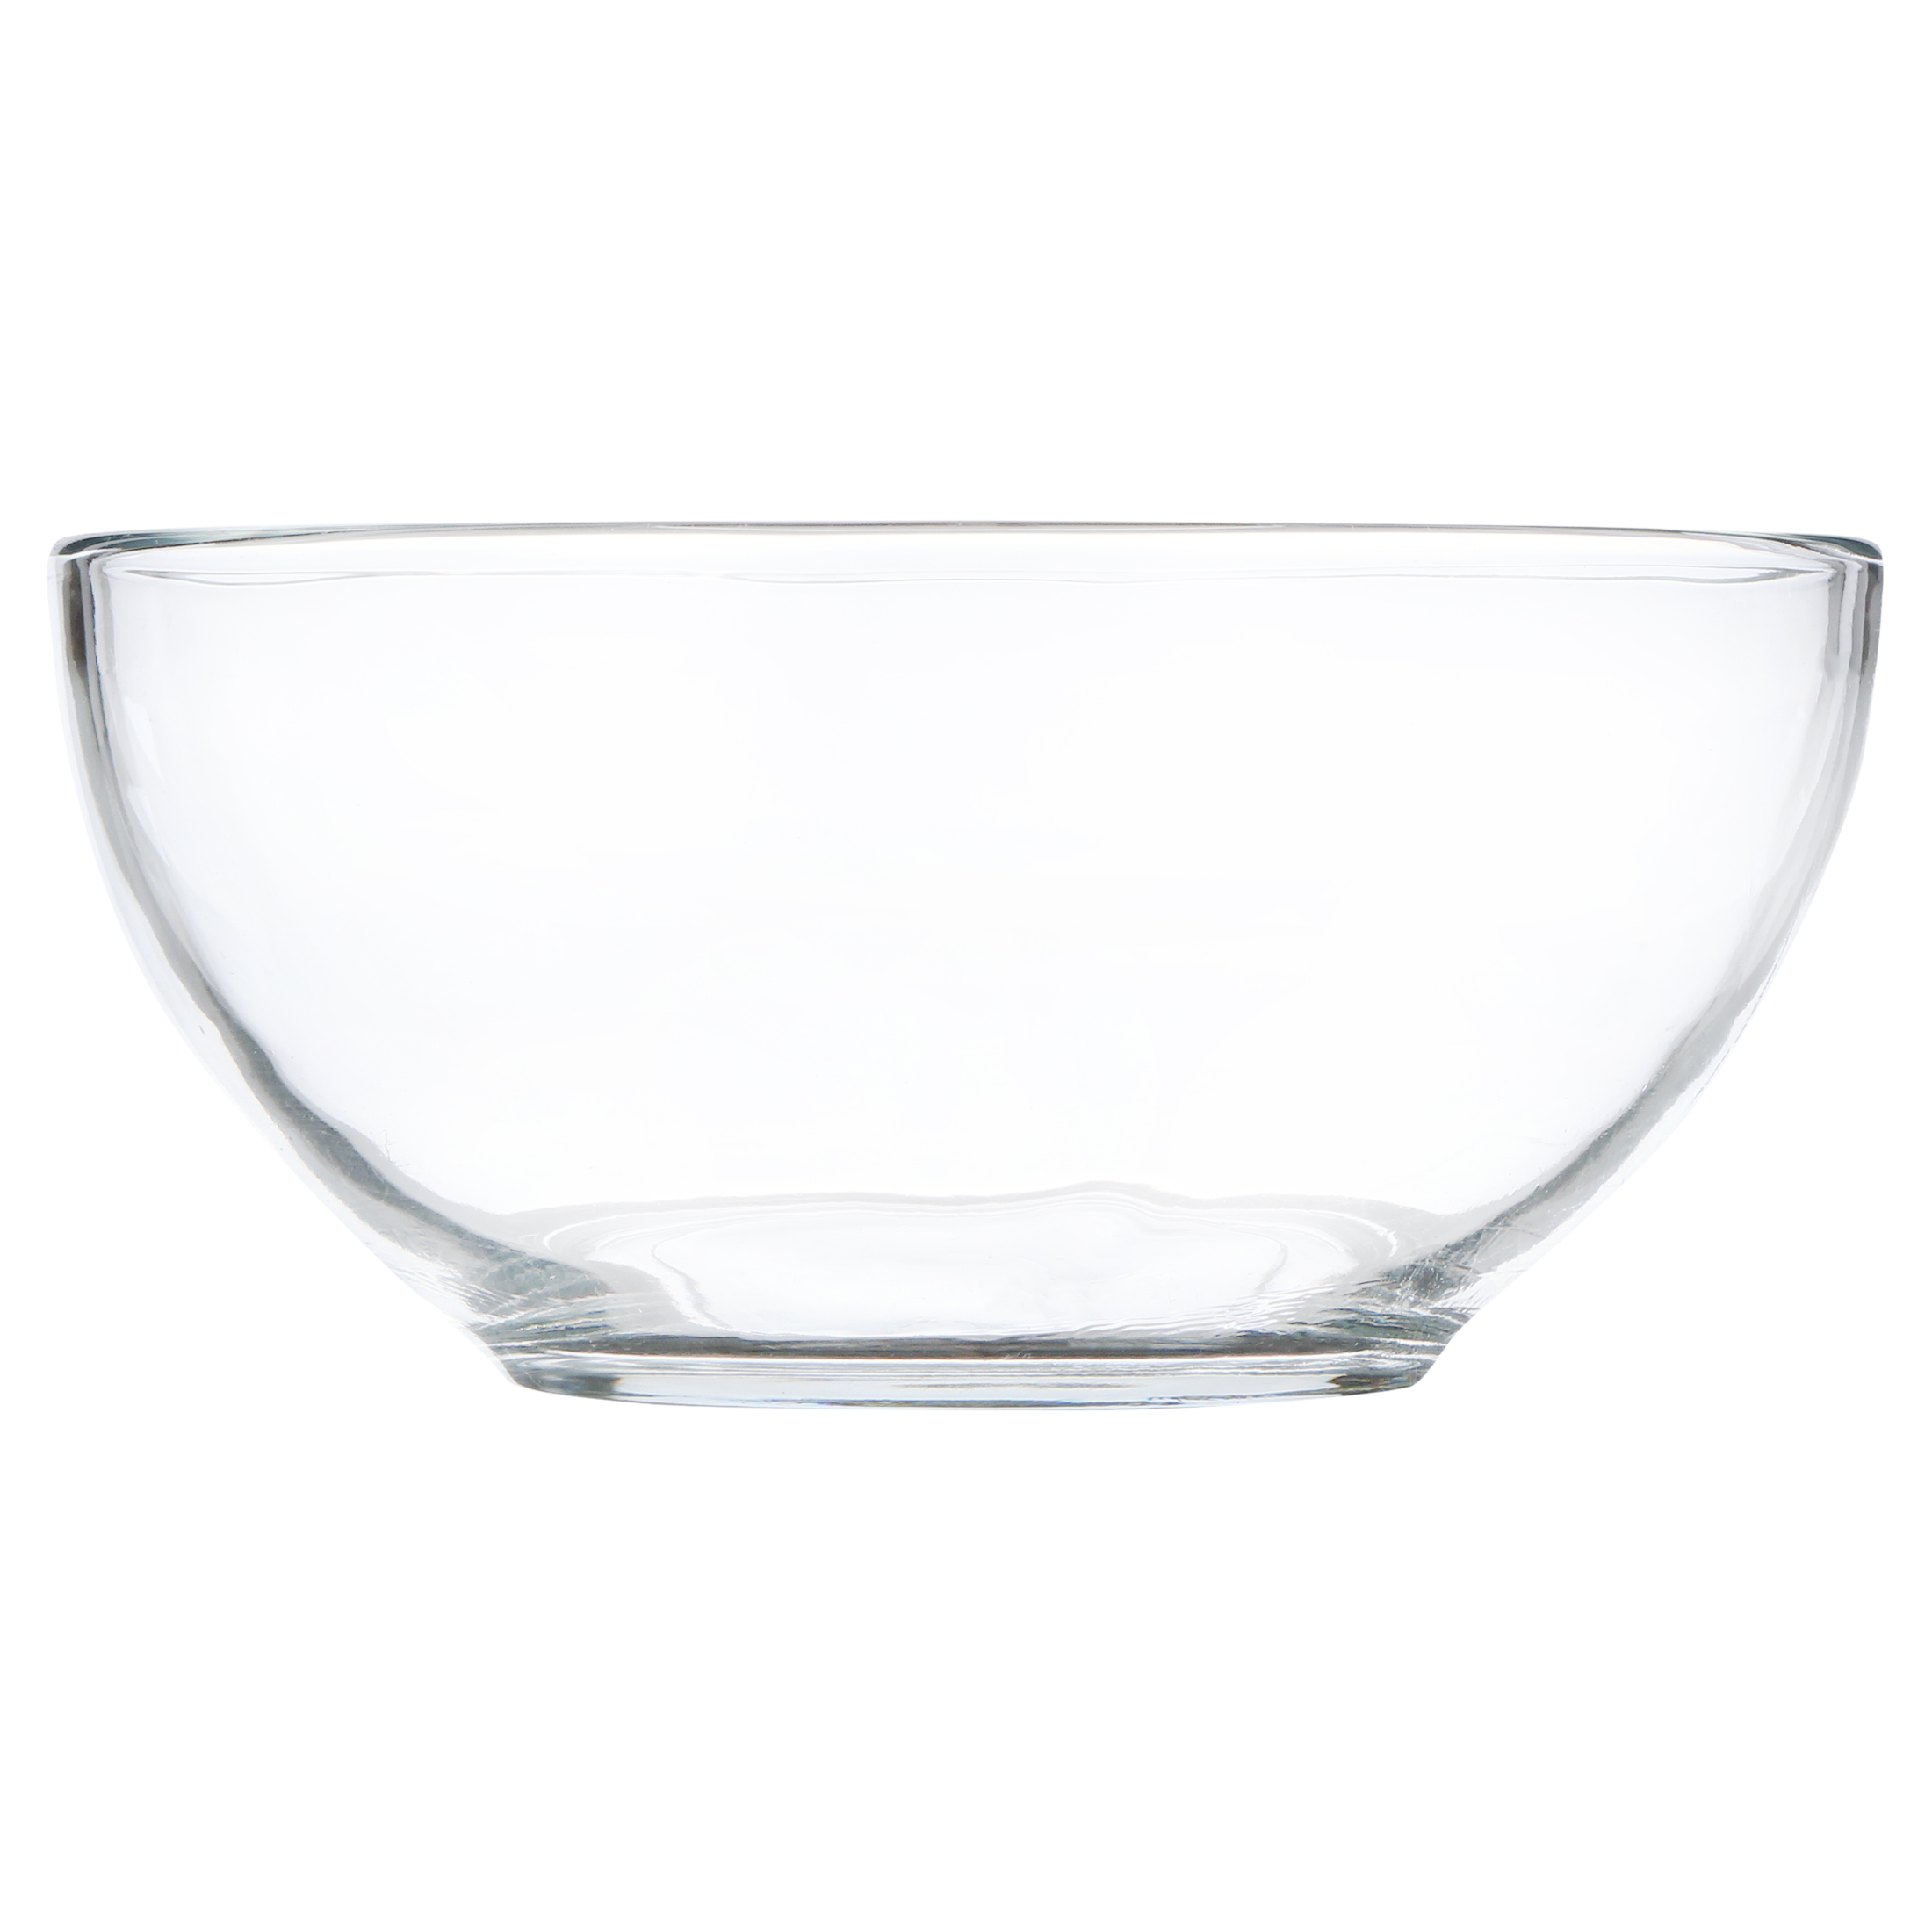 Mainstays Round Glass Bowls Catering Pack, Set of 12 - image 5 of 10